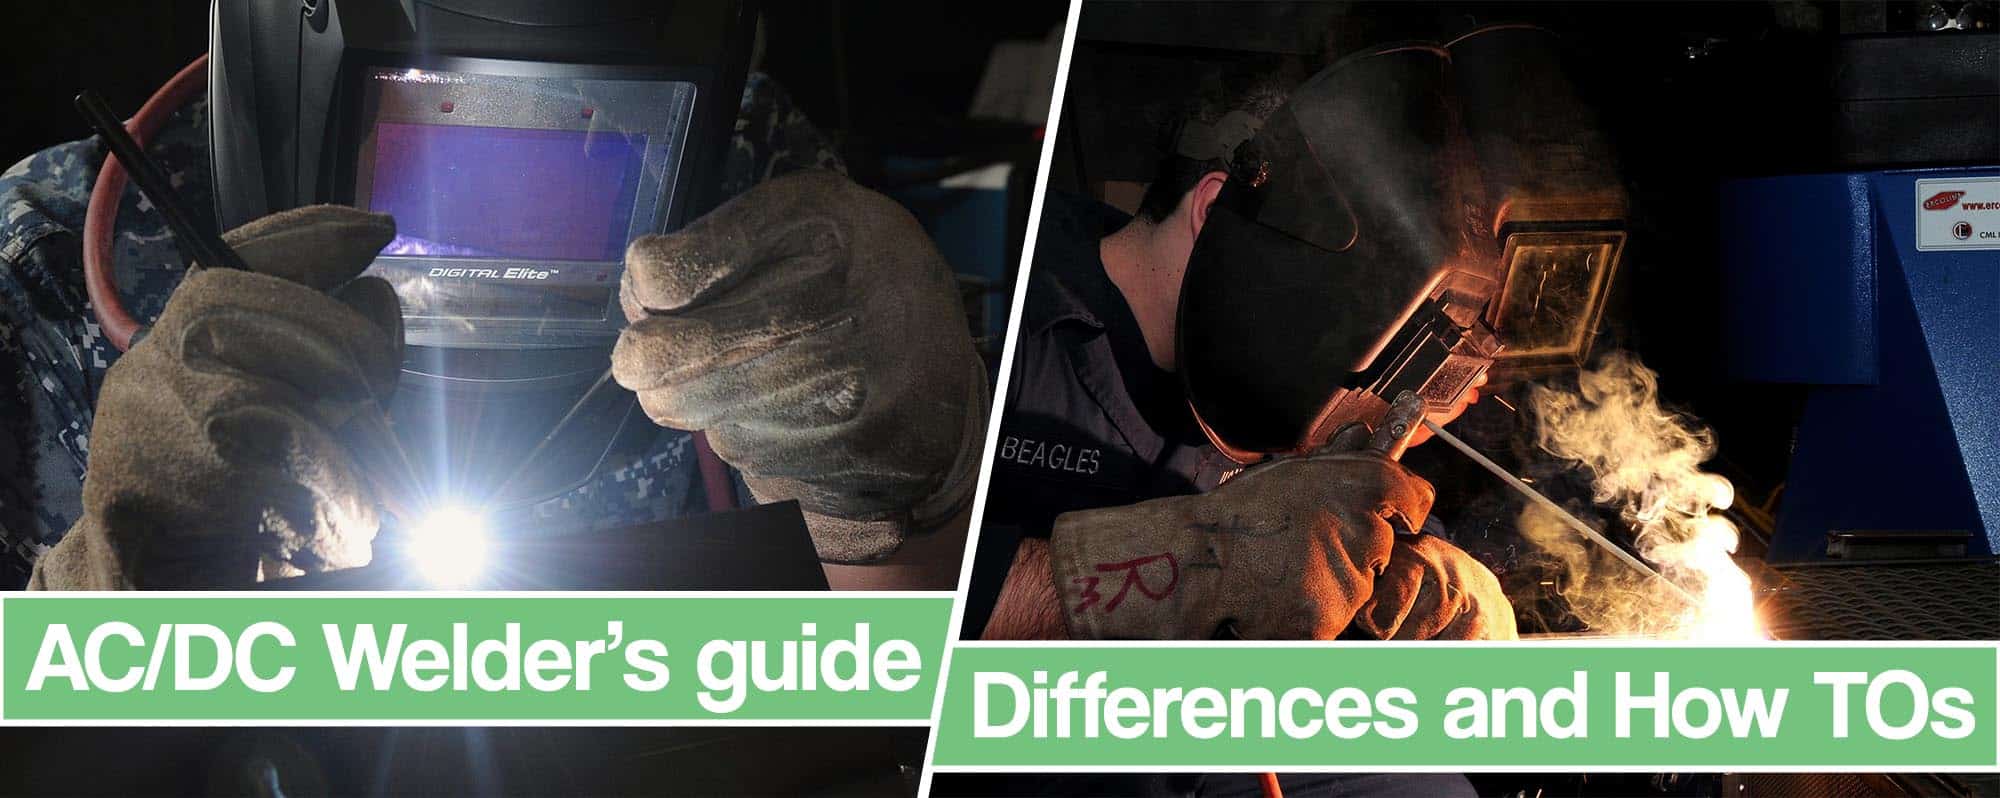 Feature image for ac vs dc welding article